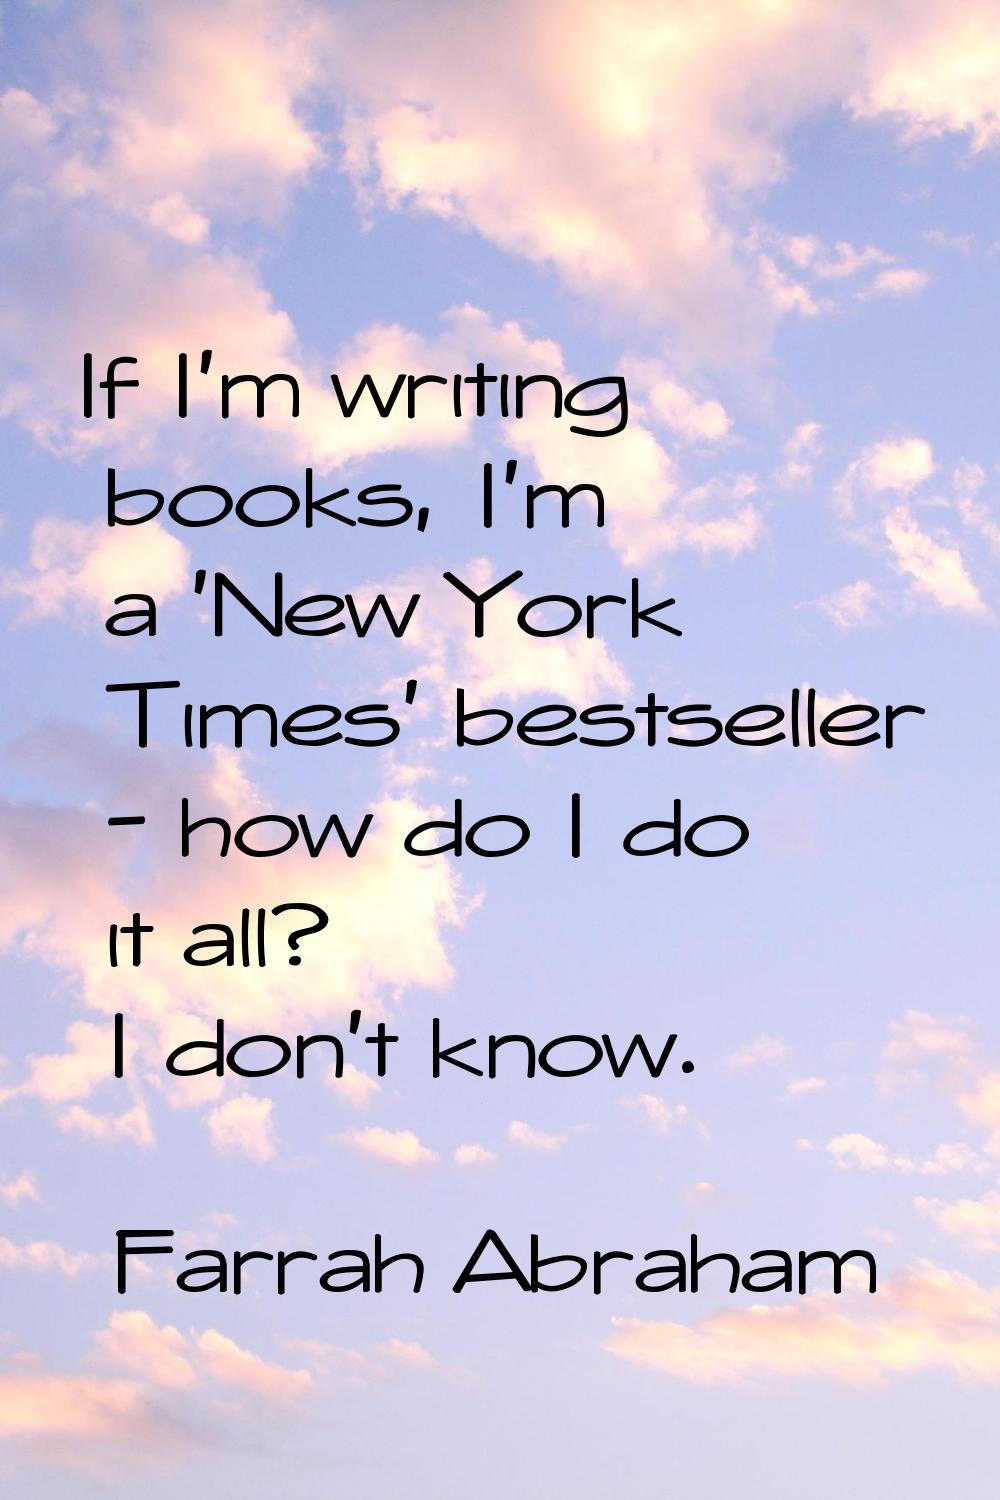 If I'm writing books, I'm a 'New York Times' bestseller - how do I do it all? I don't know.